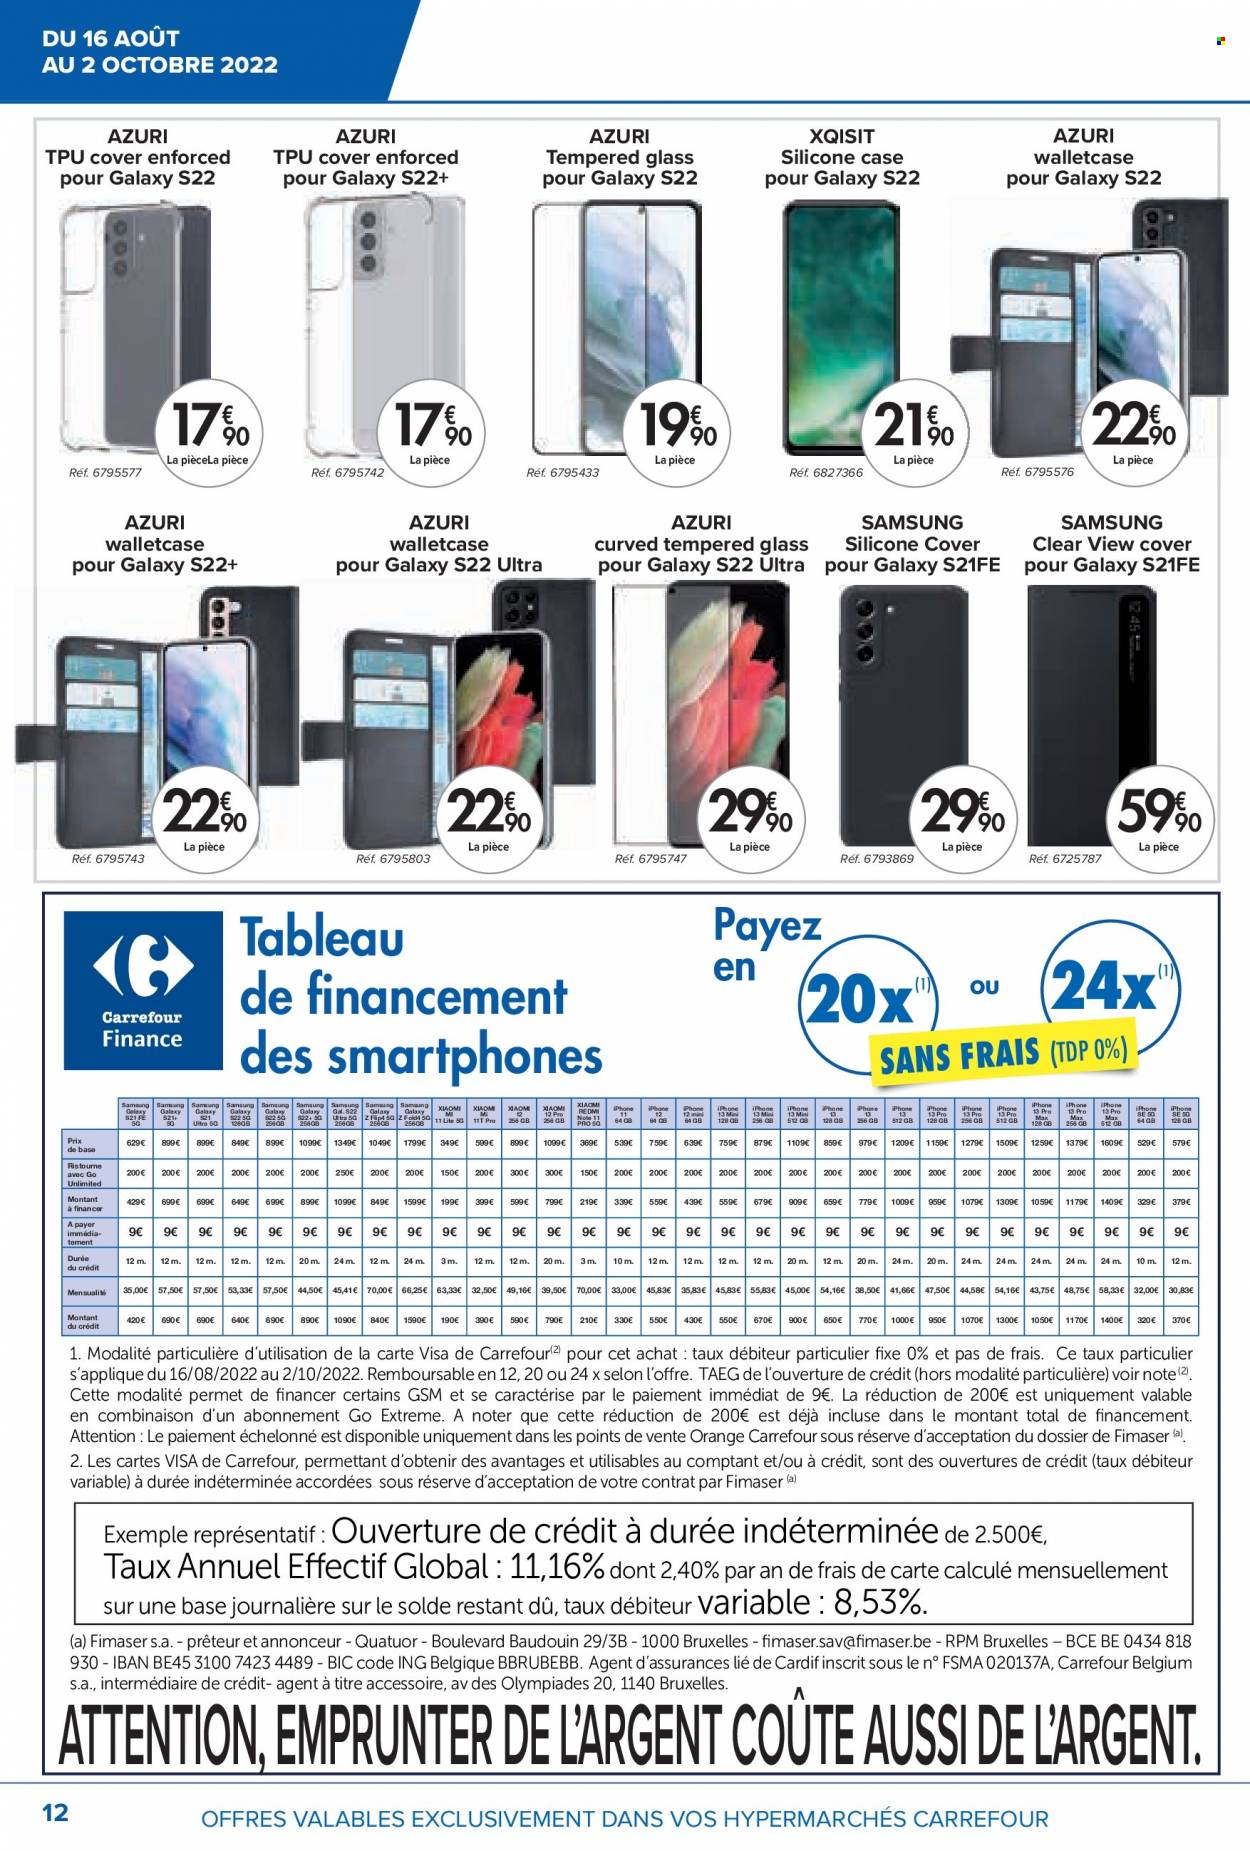 Catalogue Carrefour hypermarkt - 16.8.2022 - 2.10.2022. Page 12.